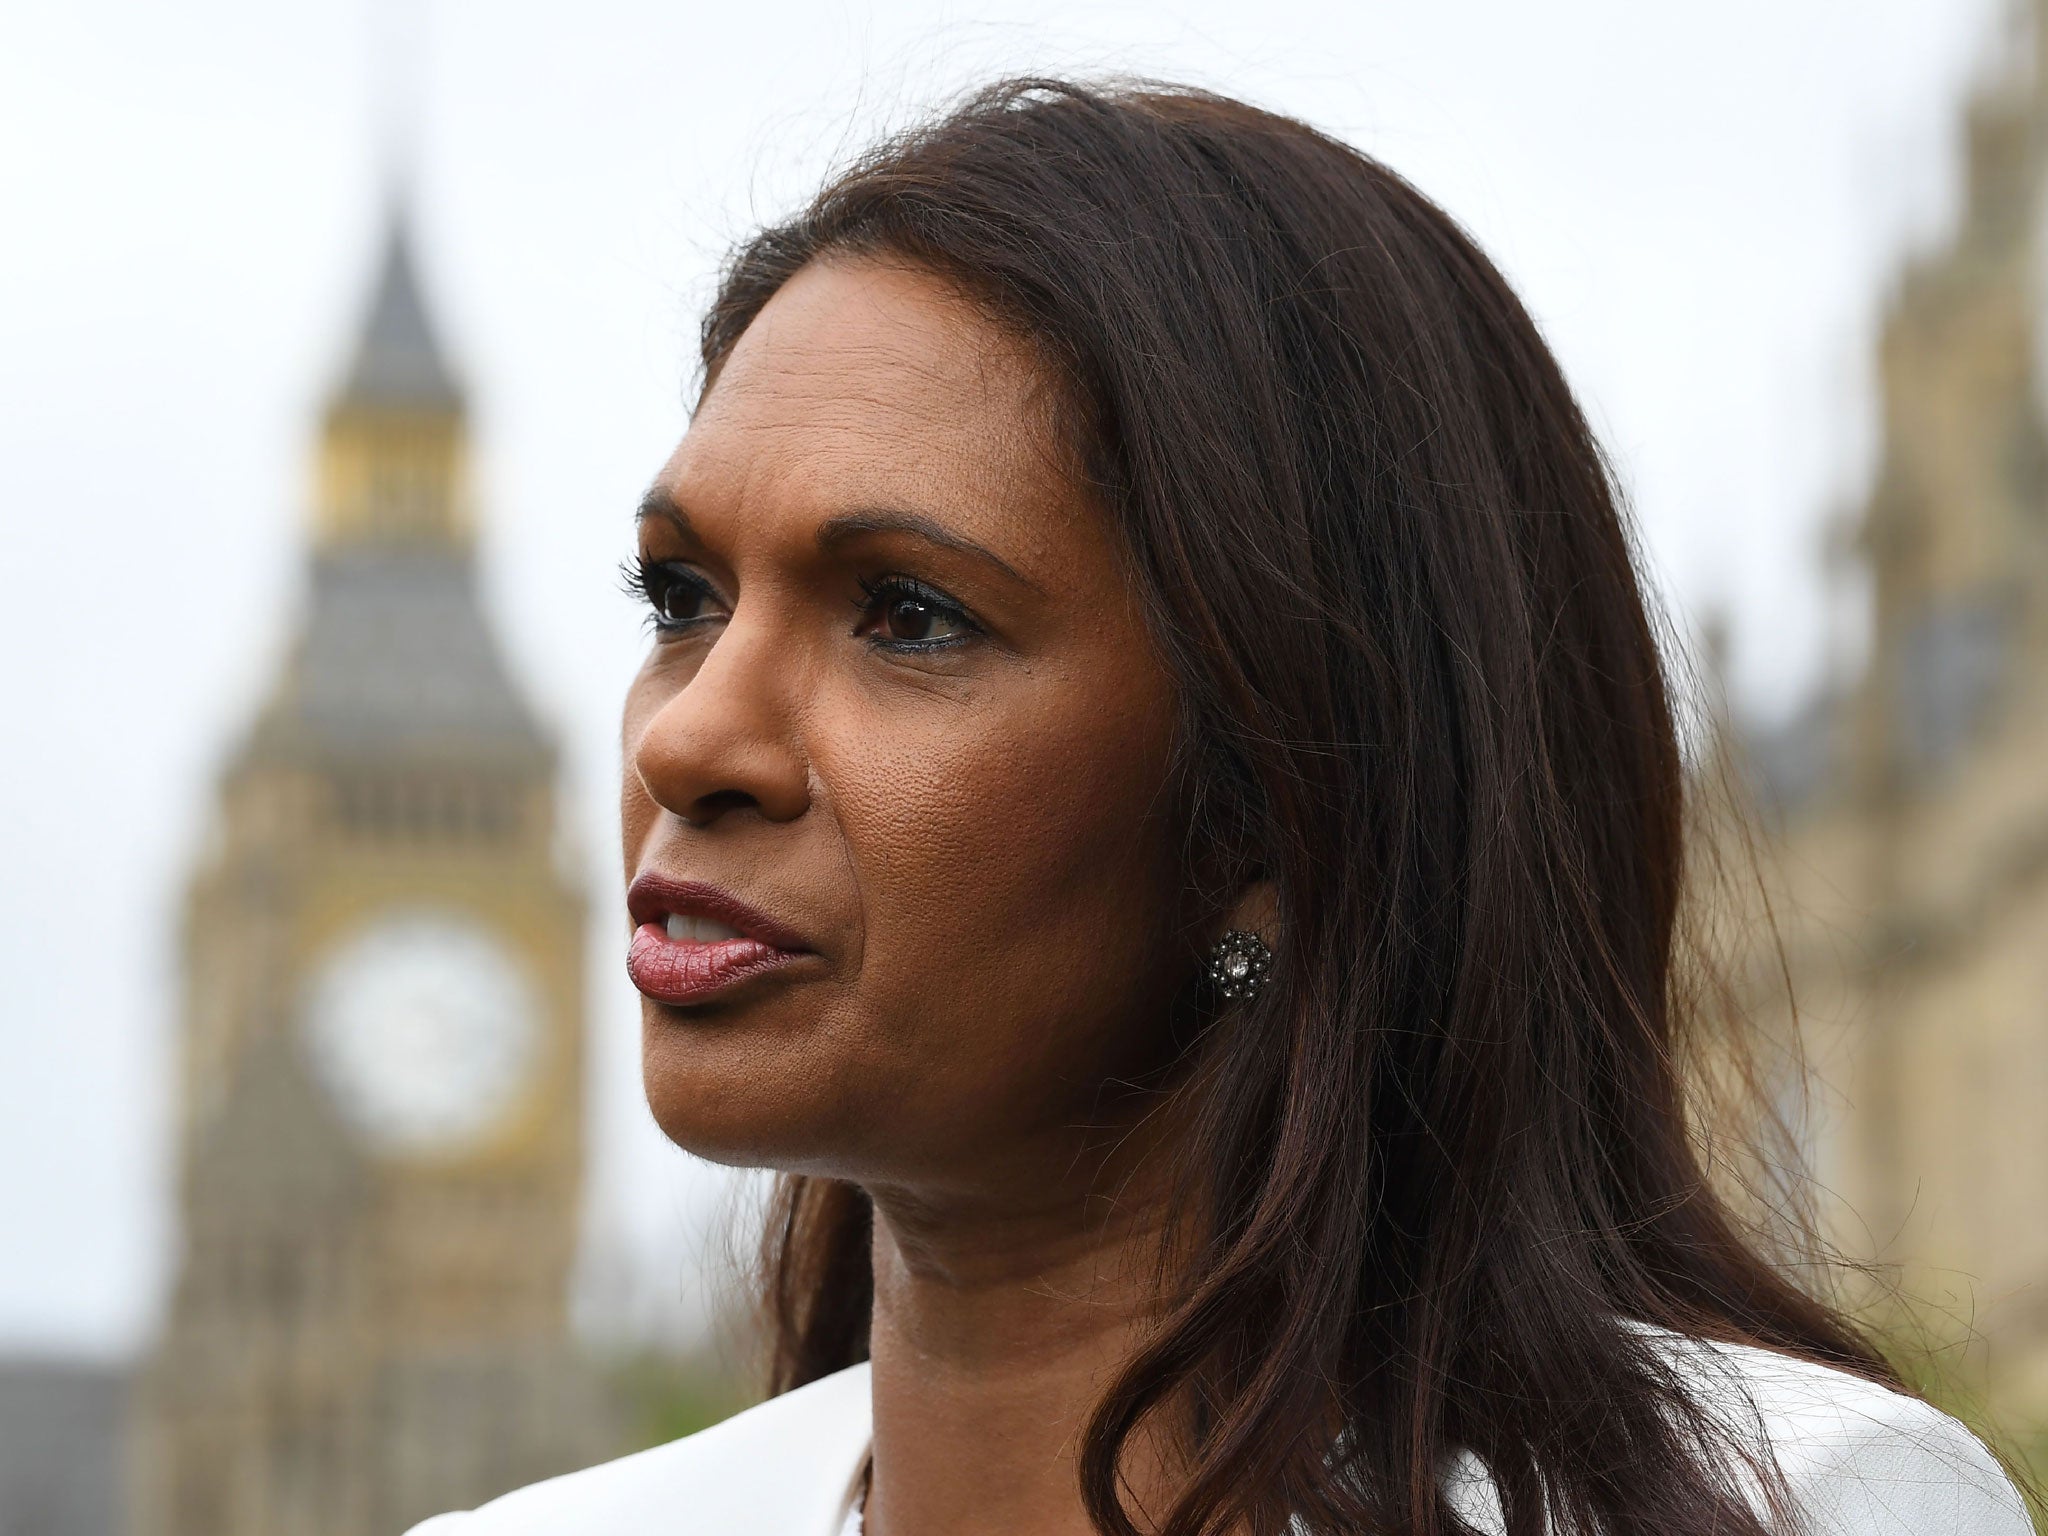 Gina Miller's campaign started off with a target to raise £10,000 but quickly exceeded it